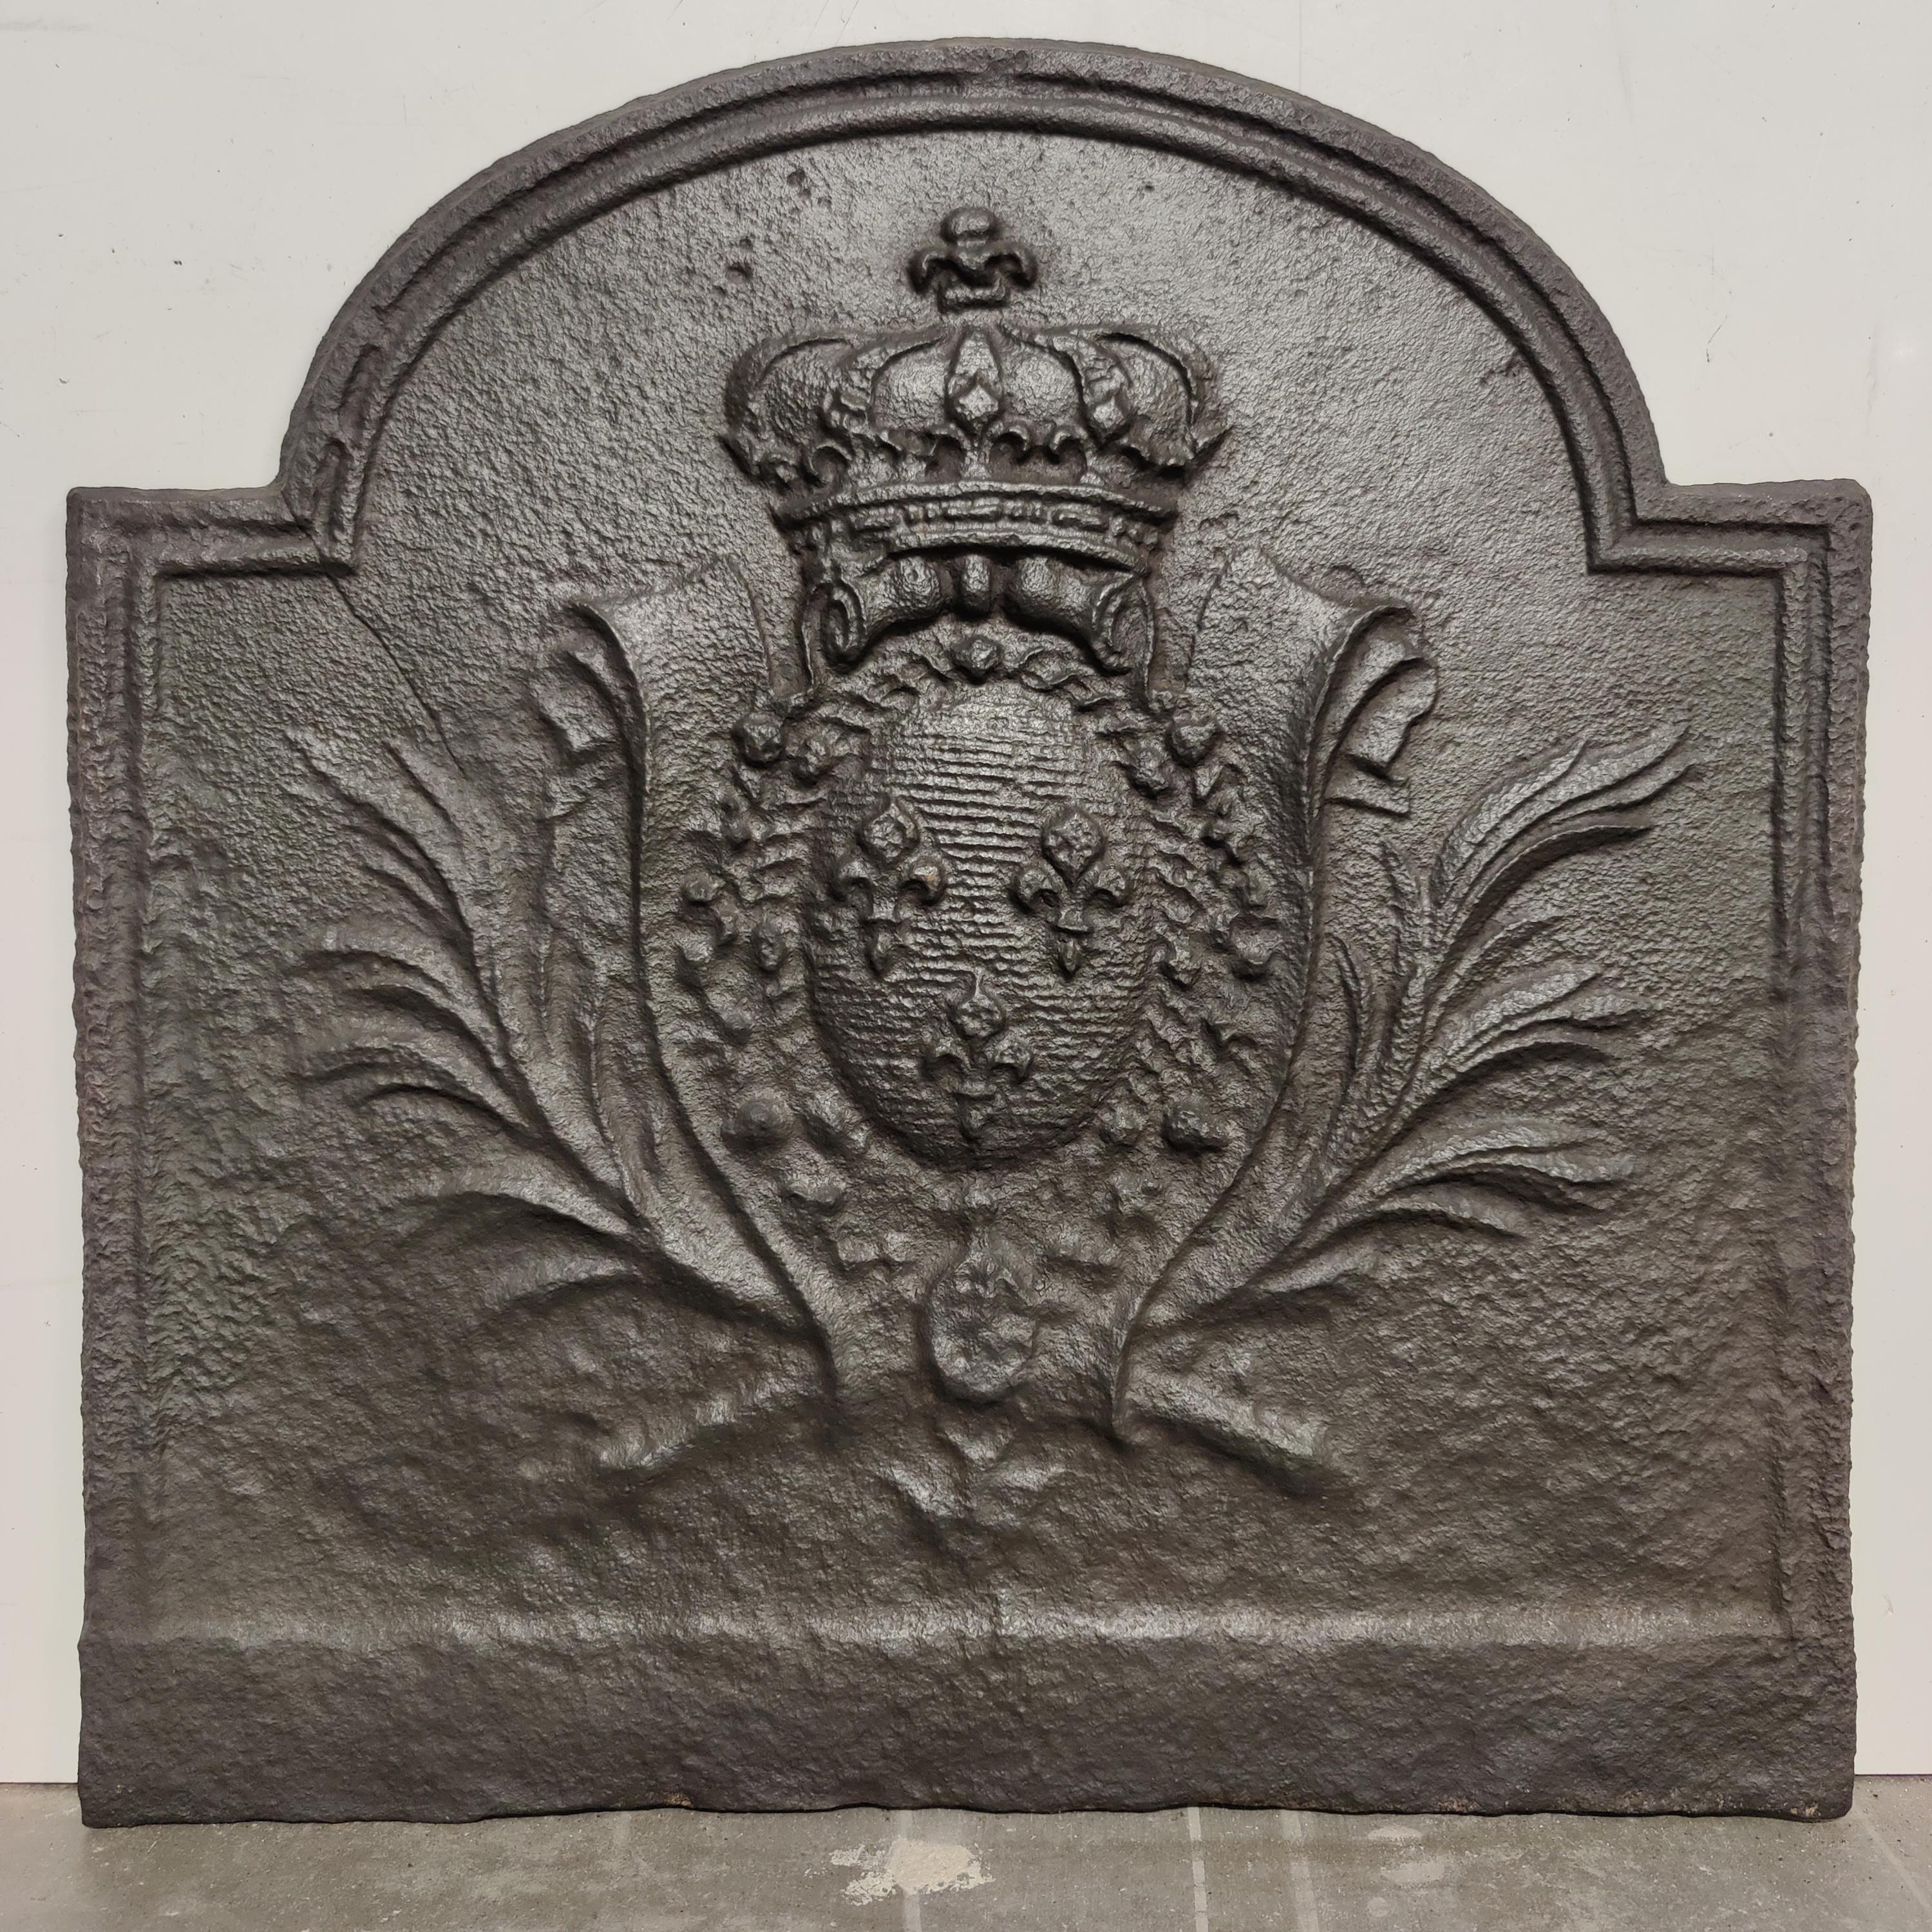 Antique fireback / backsplash, Coat Of Arms House Bourbon.

Nice cast iron antique fireback displaying the coat of arms of House Bourbon.
A European dynasty of French origin, a branch of the Capetian dynasty, the royal House of France.
Great